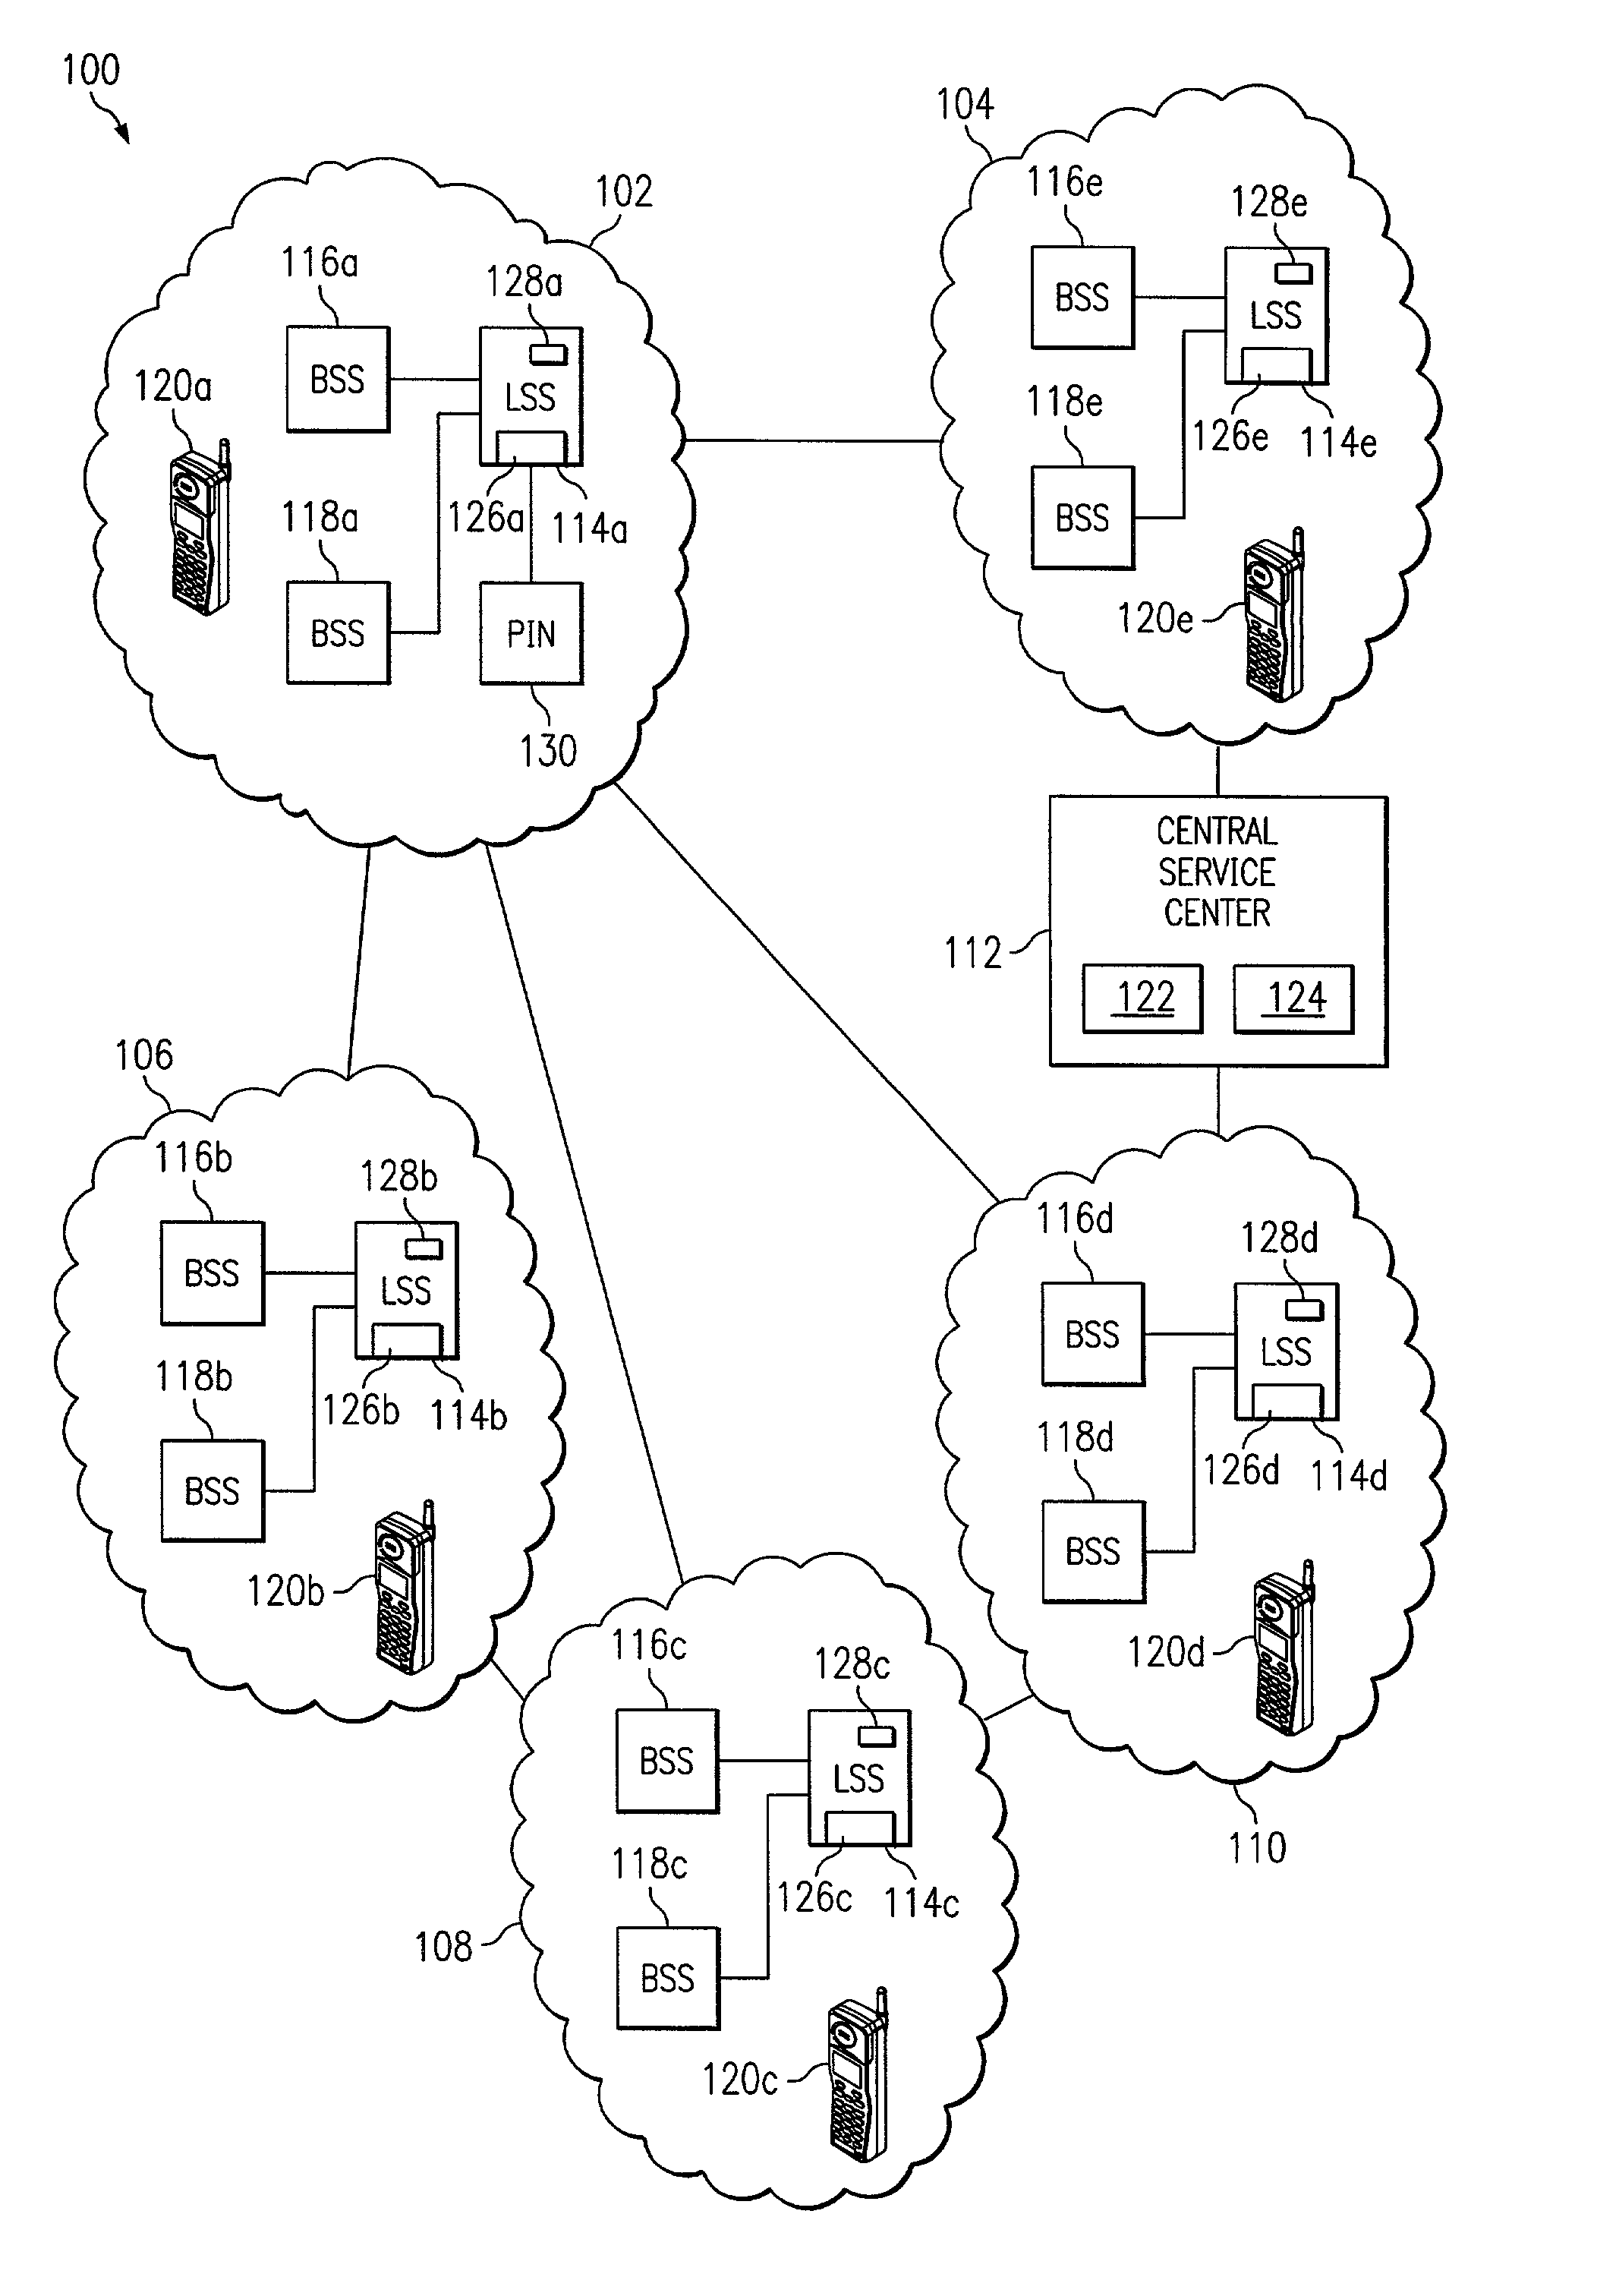 System and method for automatic mobile device activation